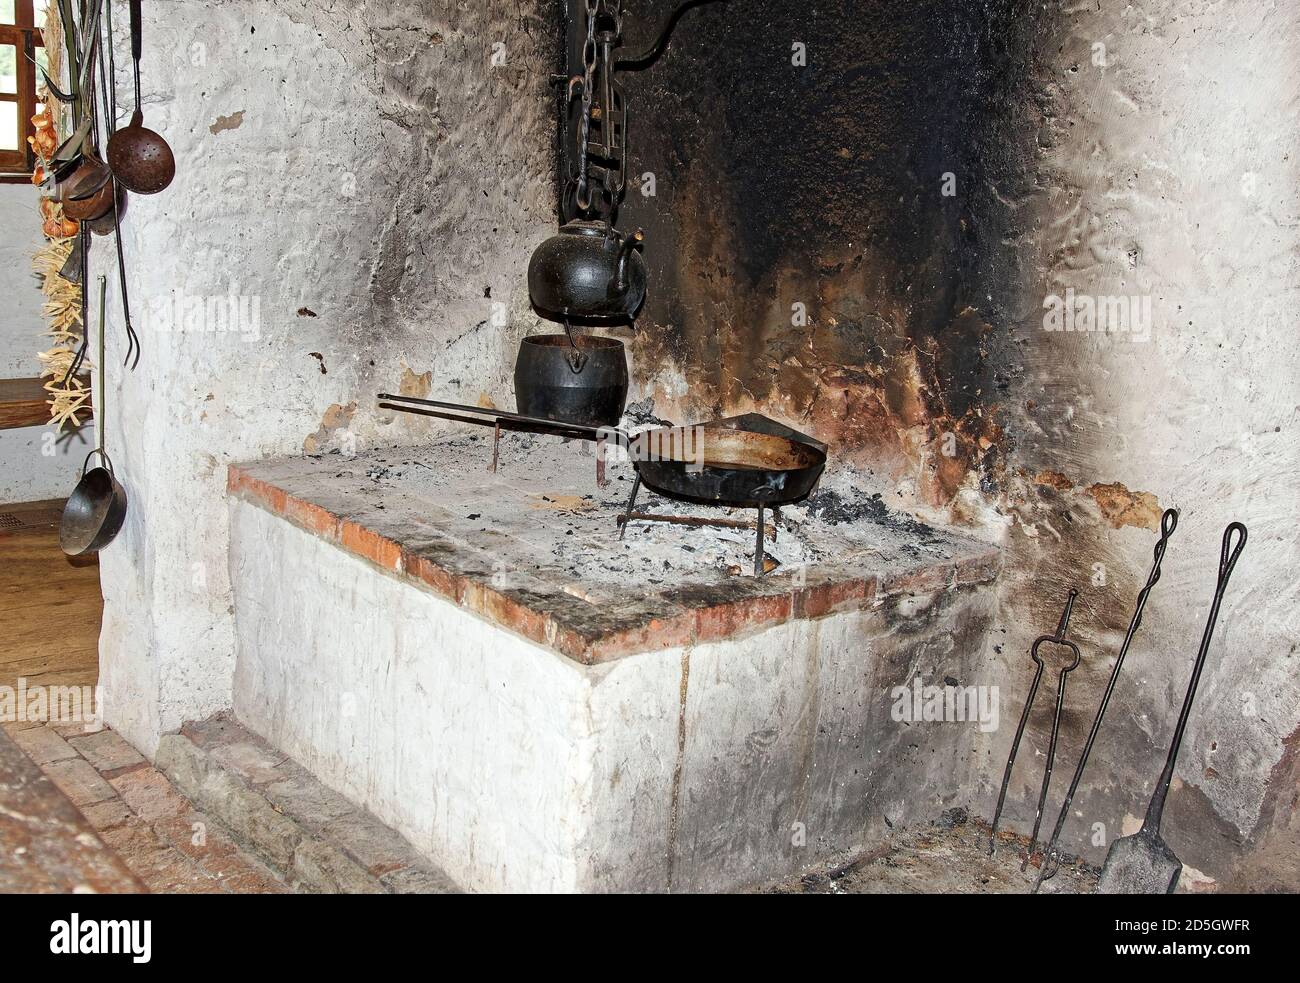 18th century kitchen, cooking over hot coals, black iron pots, old utensils,  blackened wall, whitewashed hearth, historic, Hans Herr House, Pennsylva  Stock Photo - Alamy